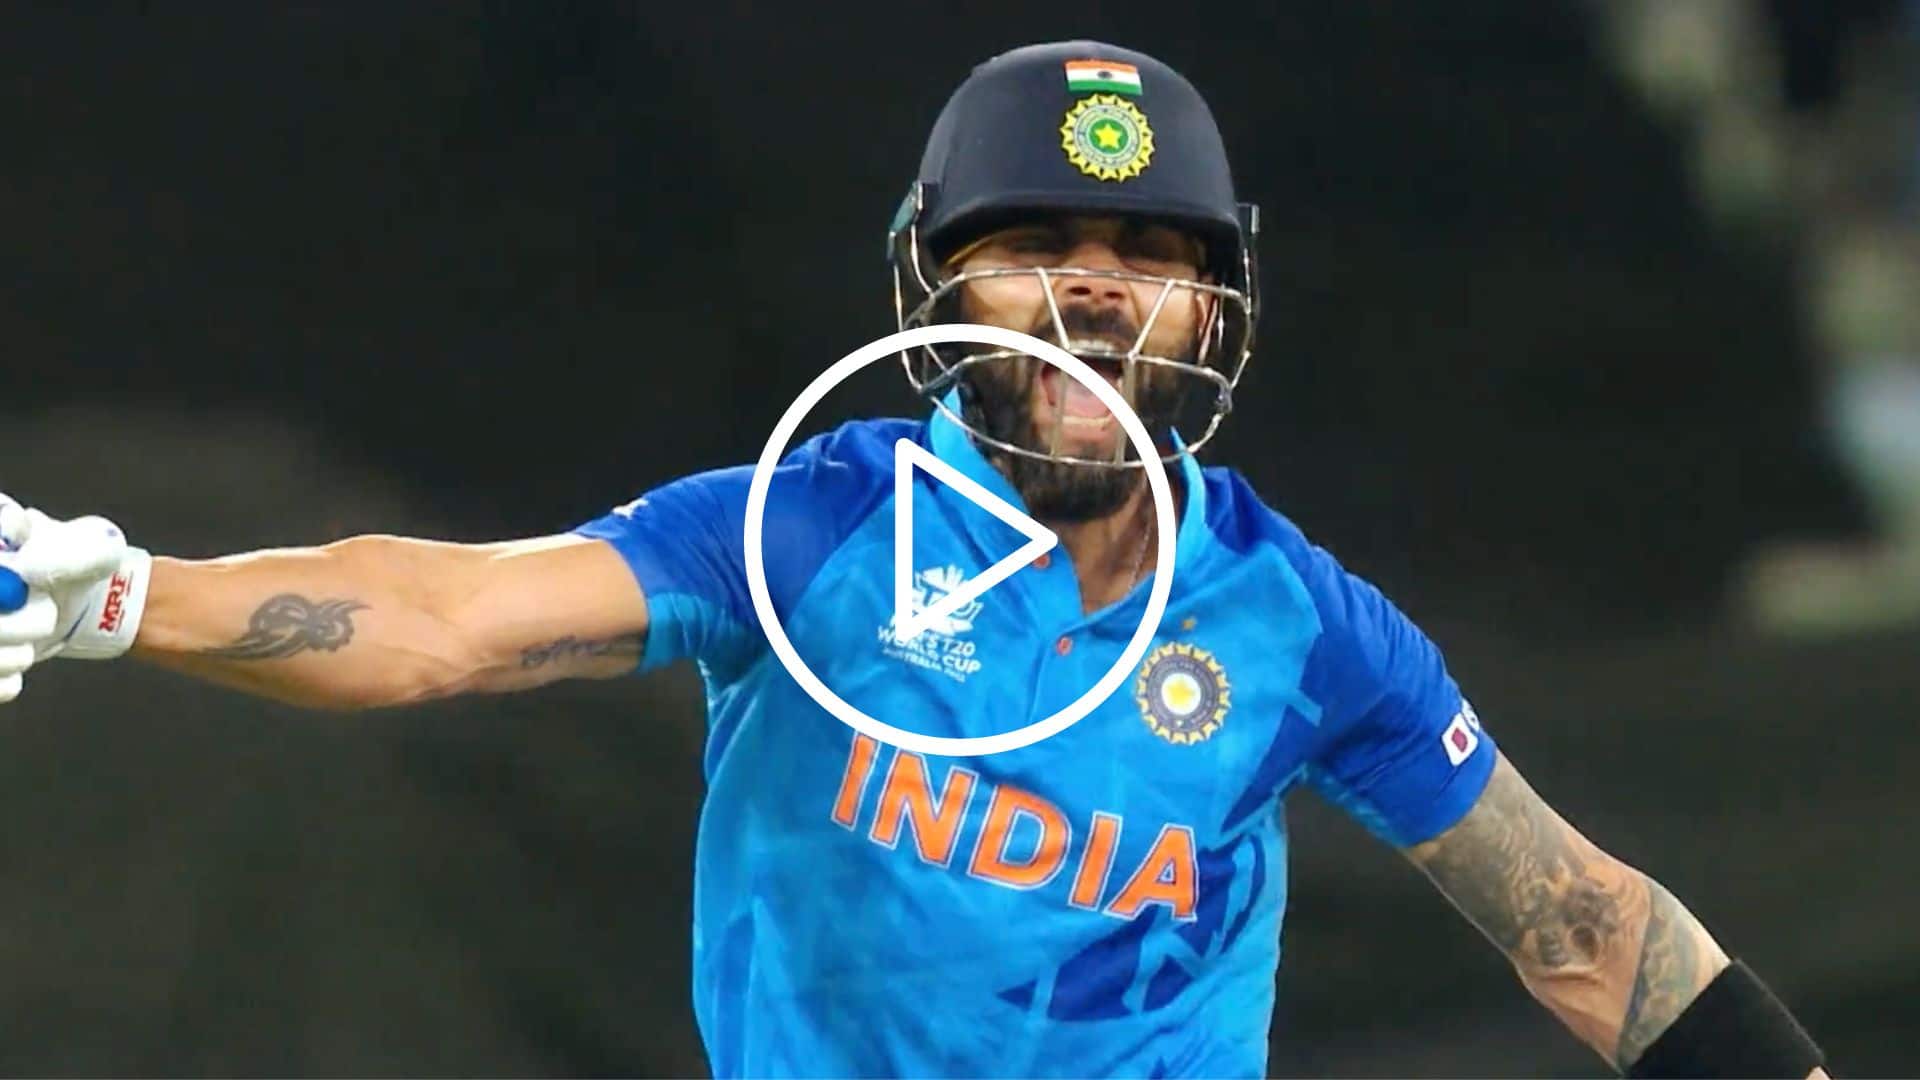 [Watch] Broadcasters Launch IND Vs AUS World Cup Match Promo Featuring Rohit & Kohli